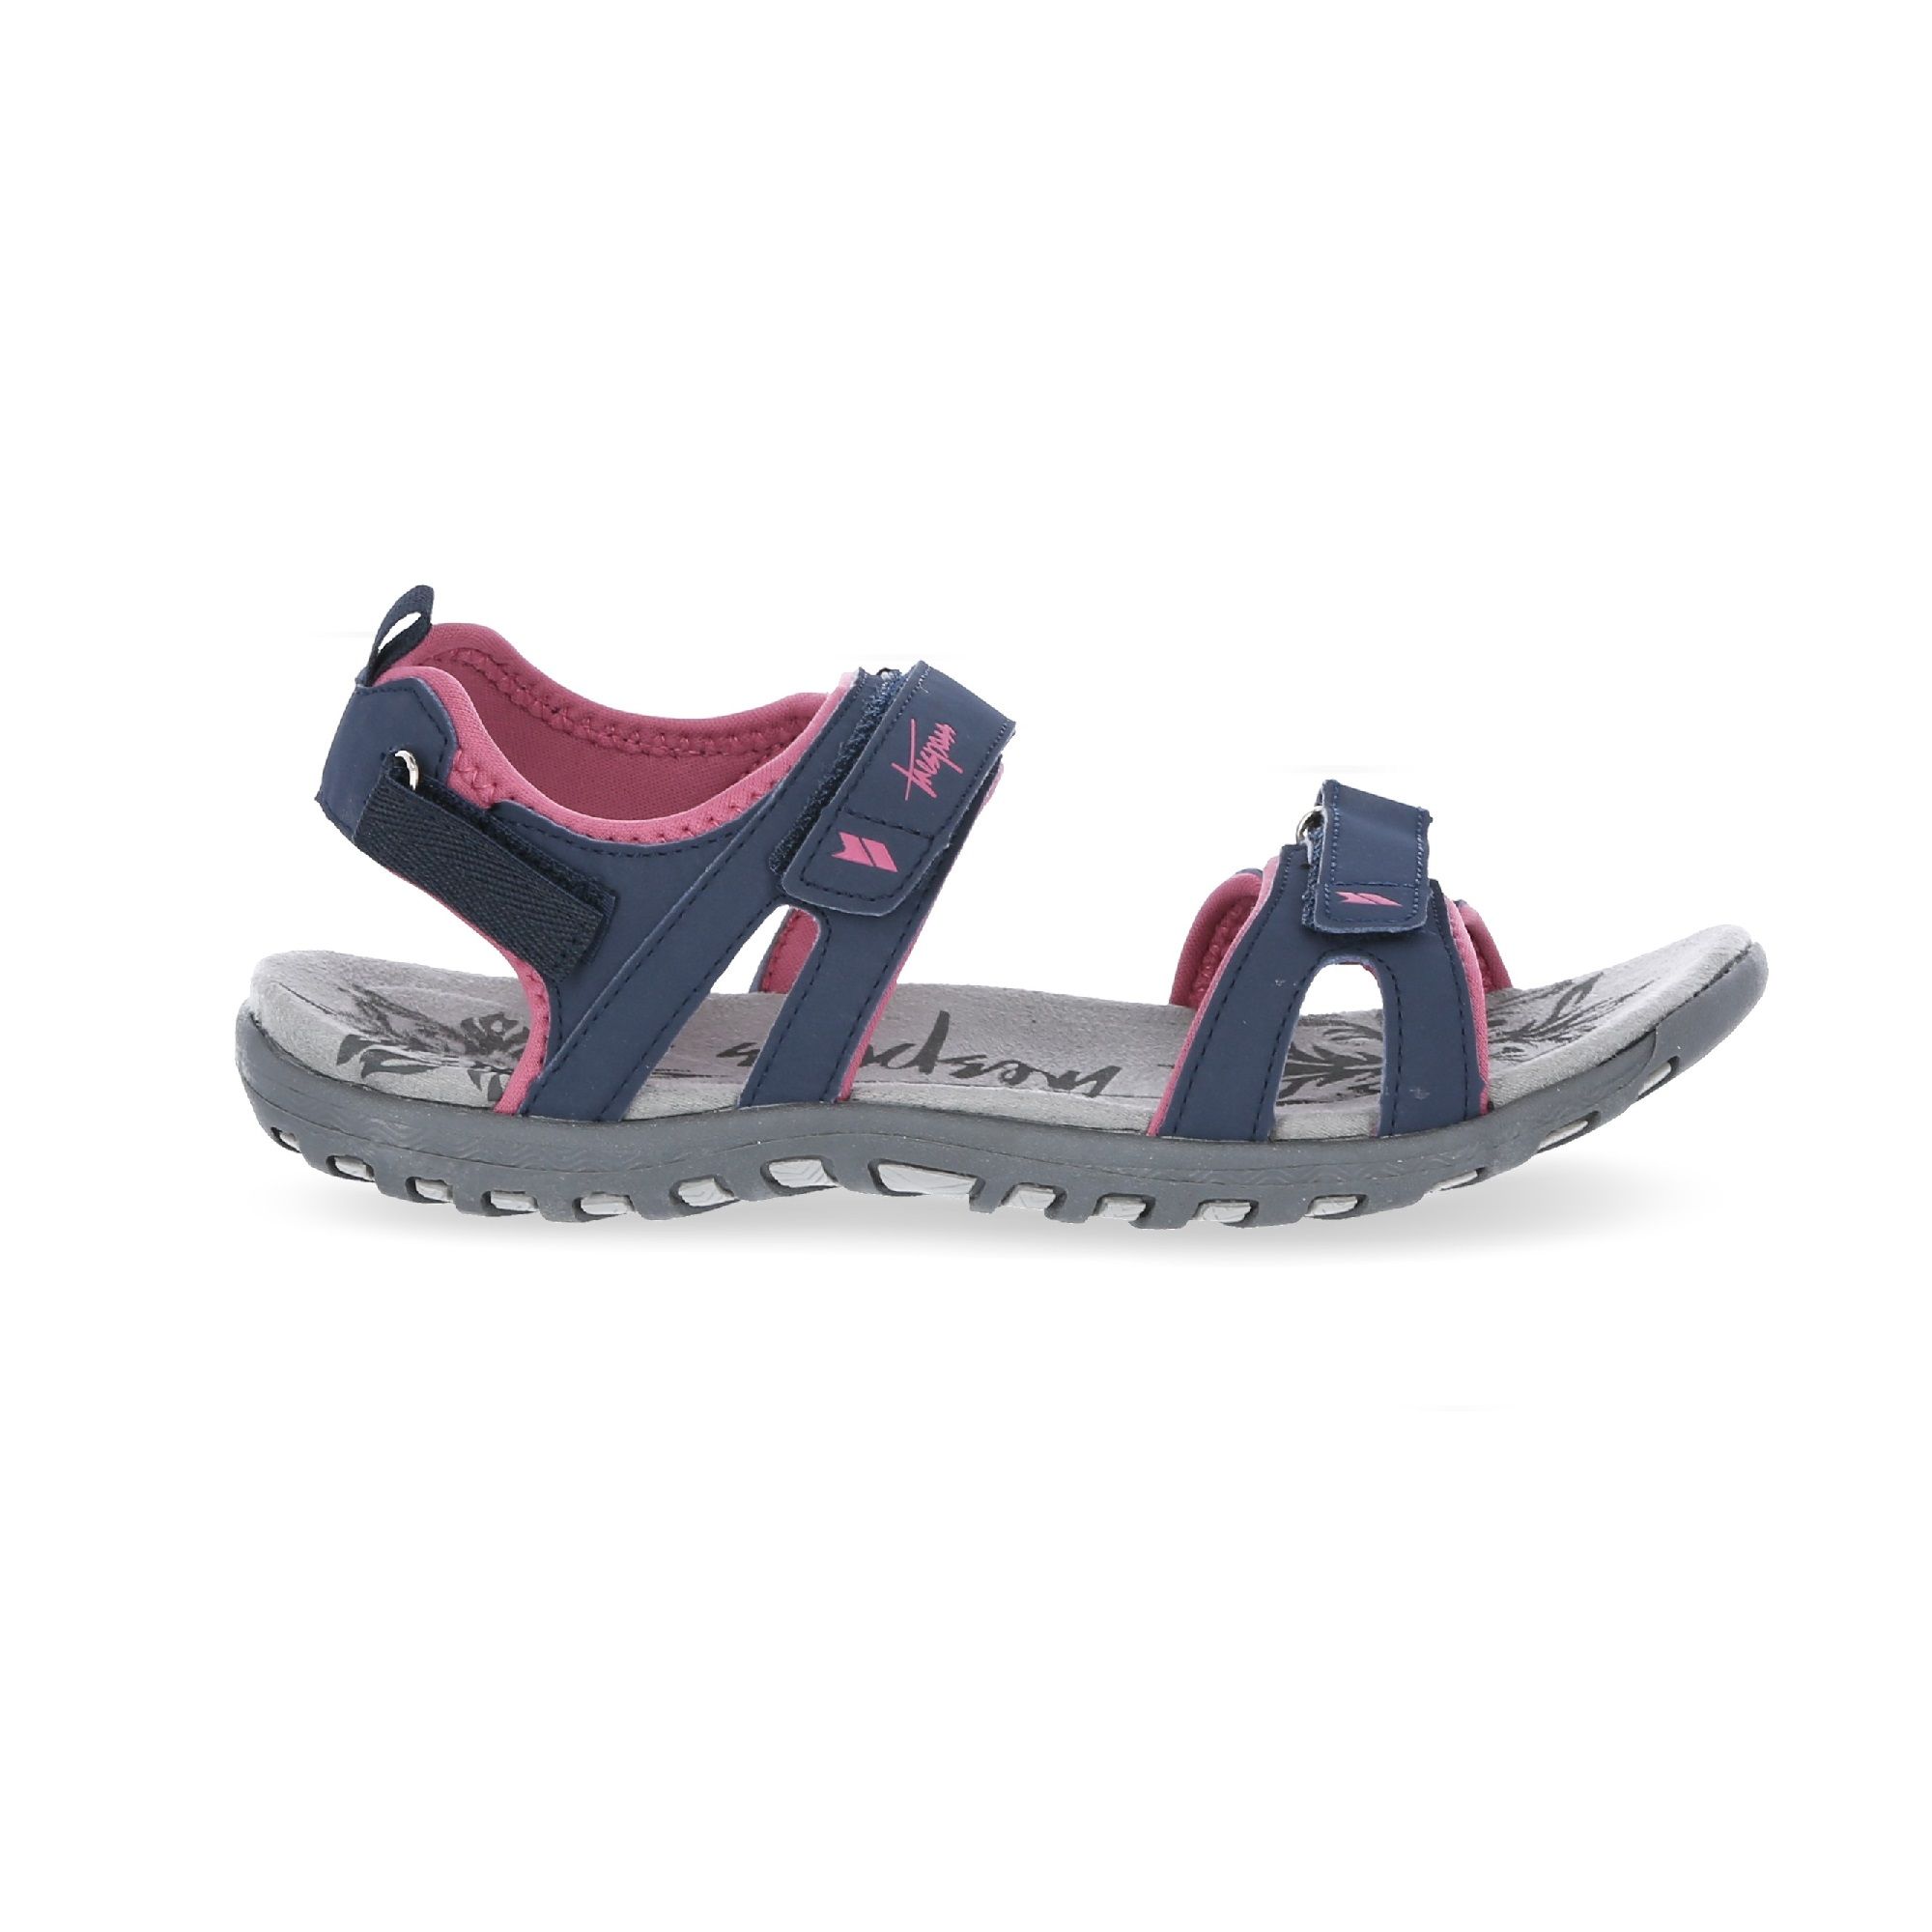 Active sandal. Fully lined upper with cushioning. Positive fit 3-point adjustment. Cushioned and moulded footbed. Durable traction outsole. Upper: PU/Textile, Midsole: Molded EVA, Outsole: TPR.